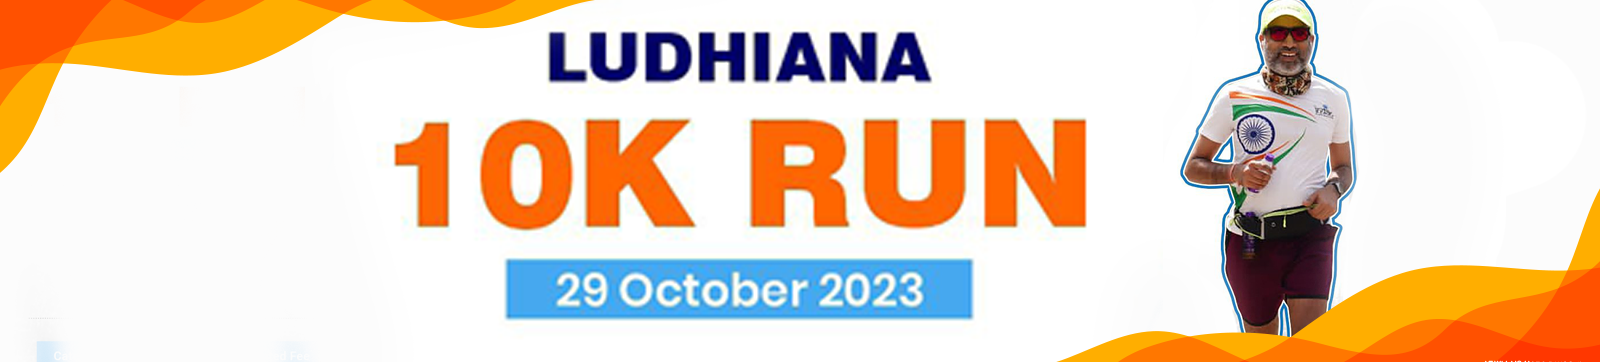 Third Time is a Bigger Charm – Ludhiana Runners Brings Back The 10k Run in 2023